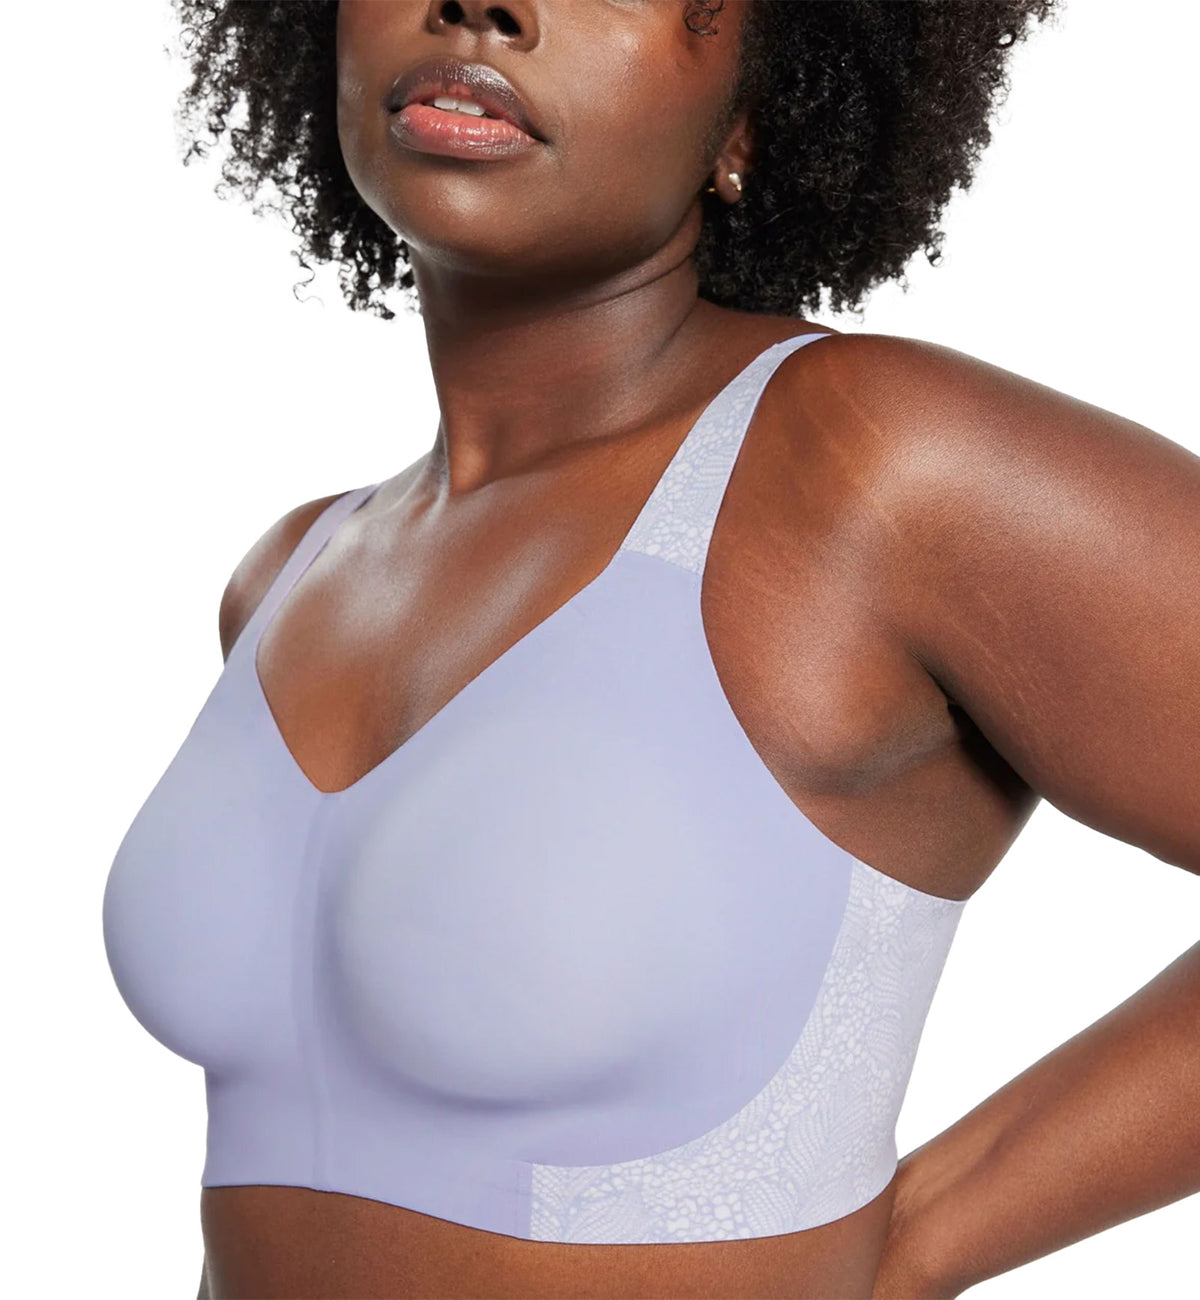 Evelyn &amp; Bobbie BEYOND Adjustable Bra (1732),Small,Moonstone Lace - Moonstone Lace,Small